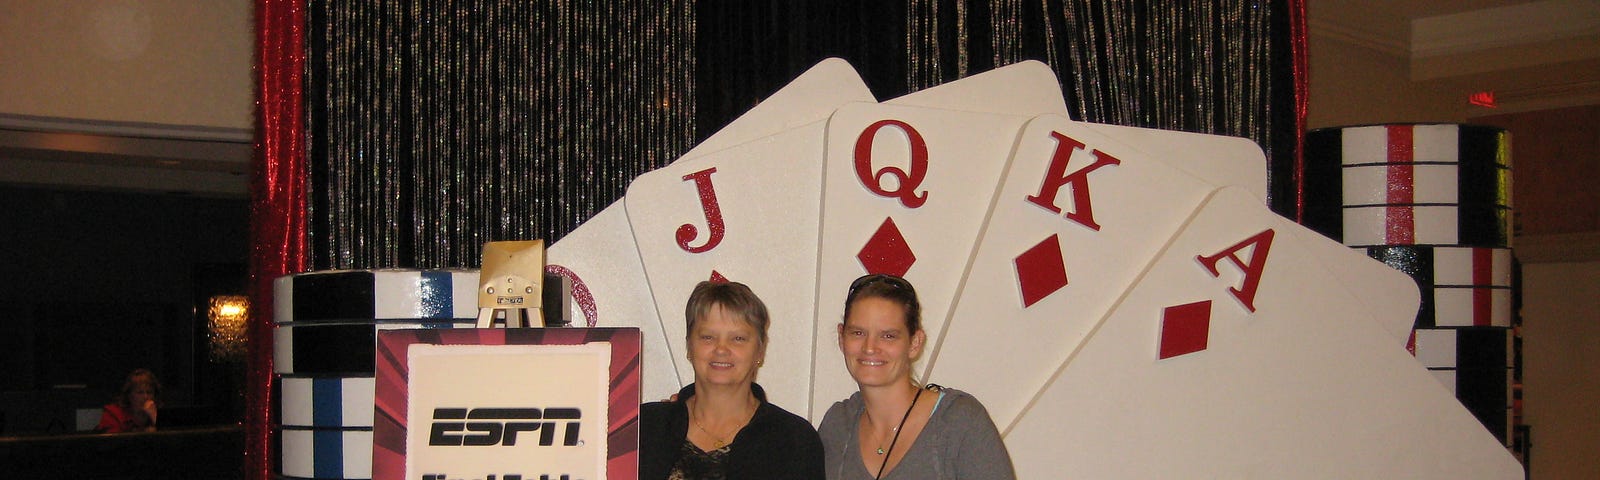 My mom and I standing in front of and ESPN Final Table sign with an arrow.